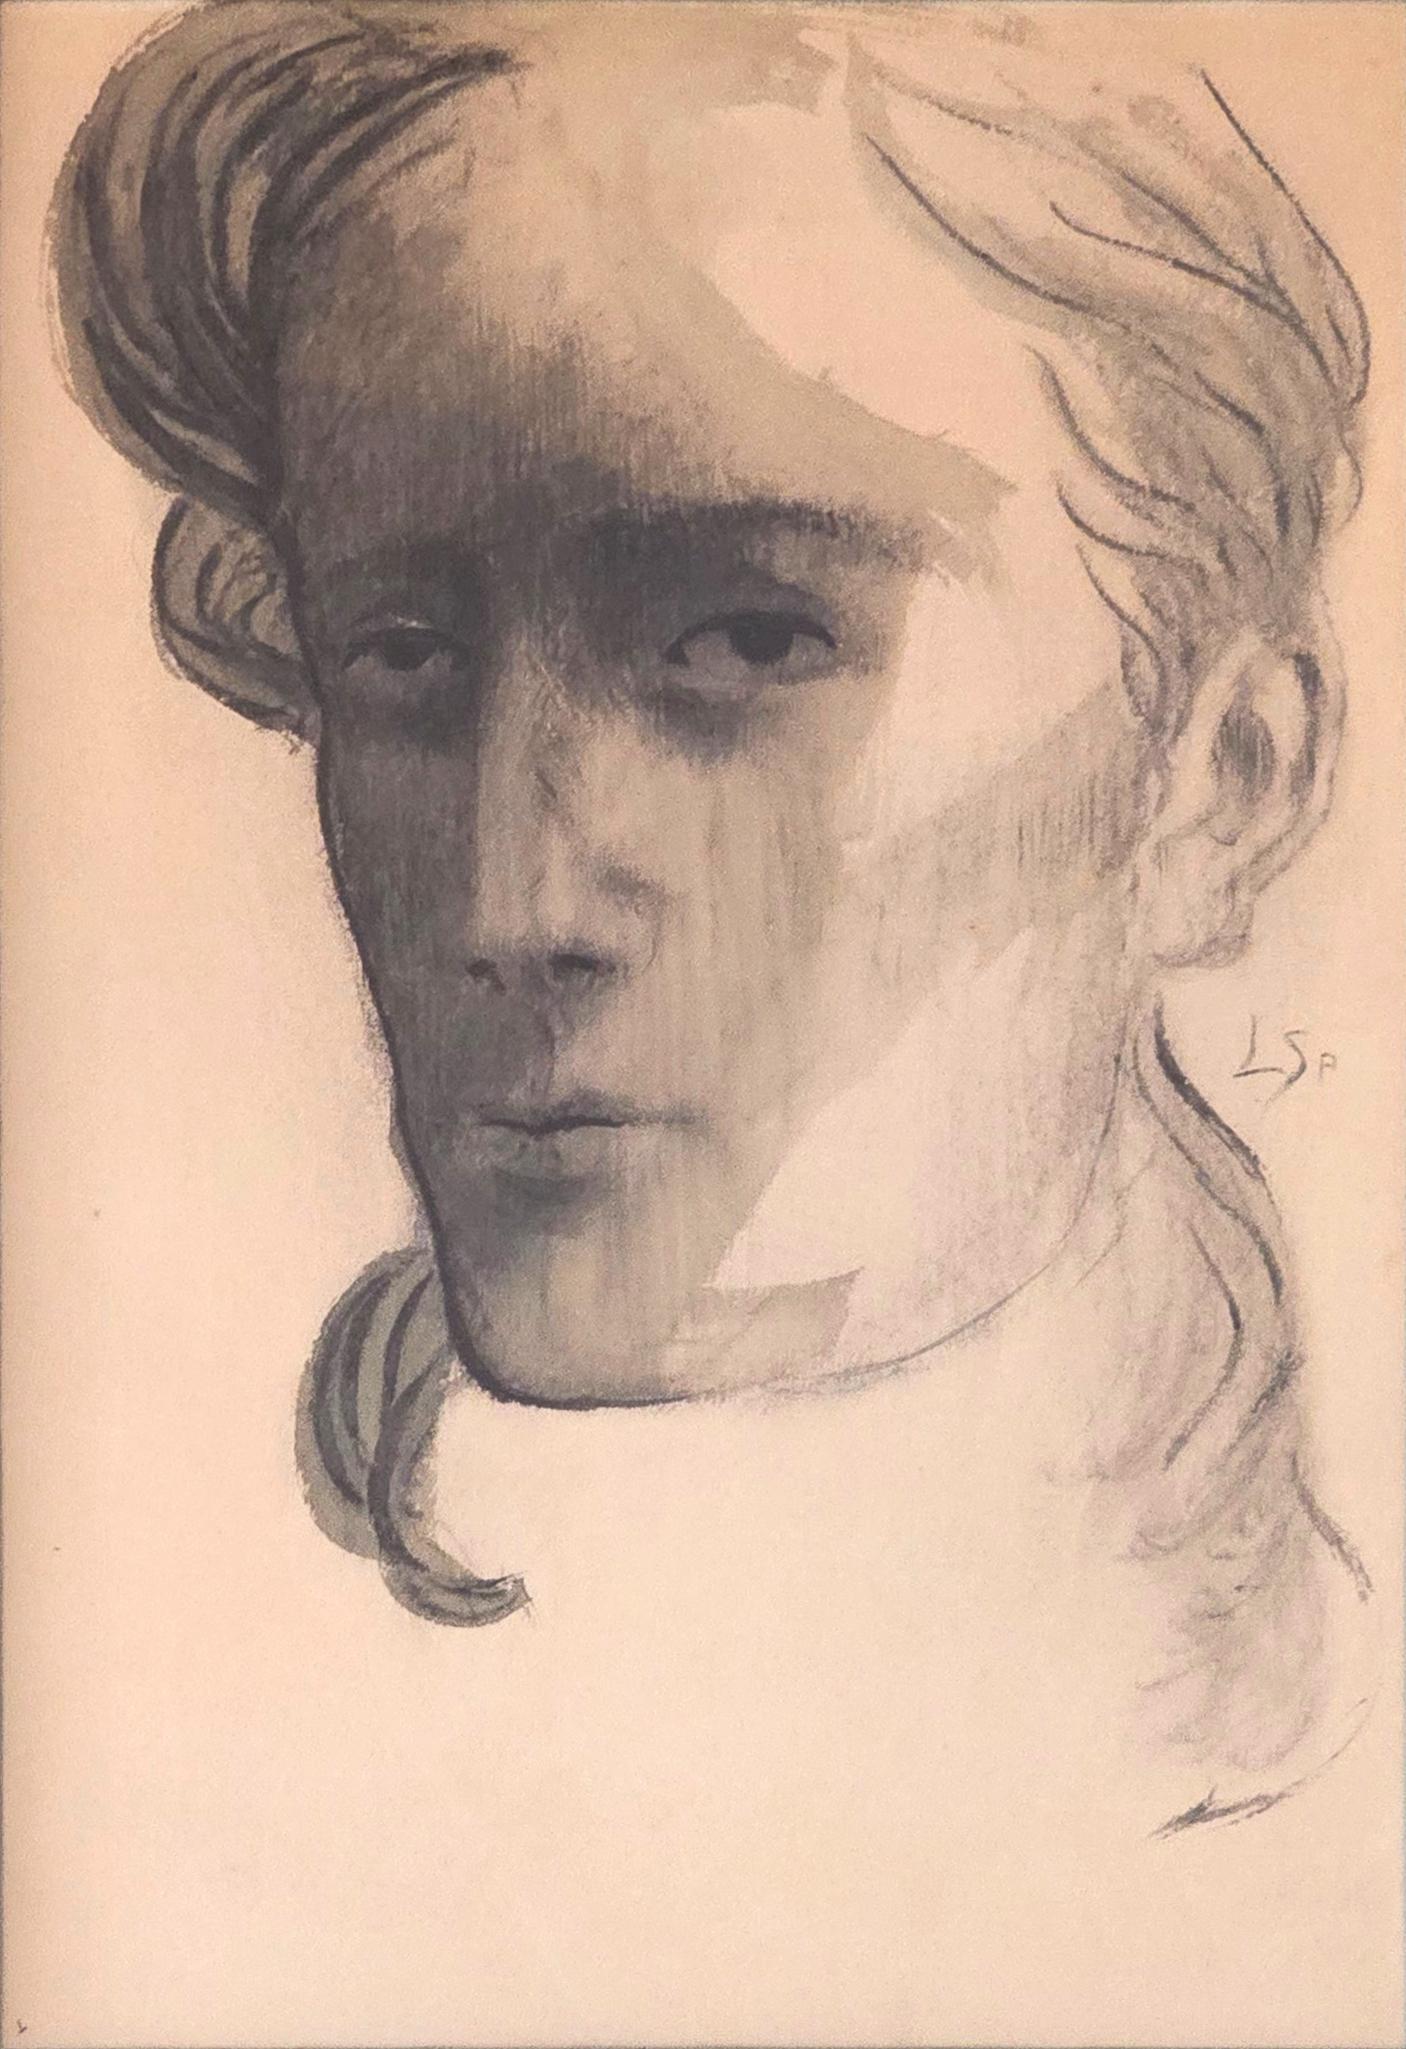 Leon Spilliaert (1881-1946)
Portrait d’un jeune homme - 1901.
Pencil, Indian ink, brush, wash, watercolour (blue-green), coloured pencil (blue) on paper. 311x196 mm 
Initials on right halfway up: LSP (Indian ink, brush) 
Signature on reverse top